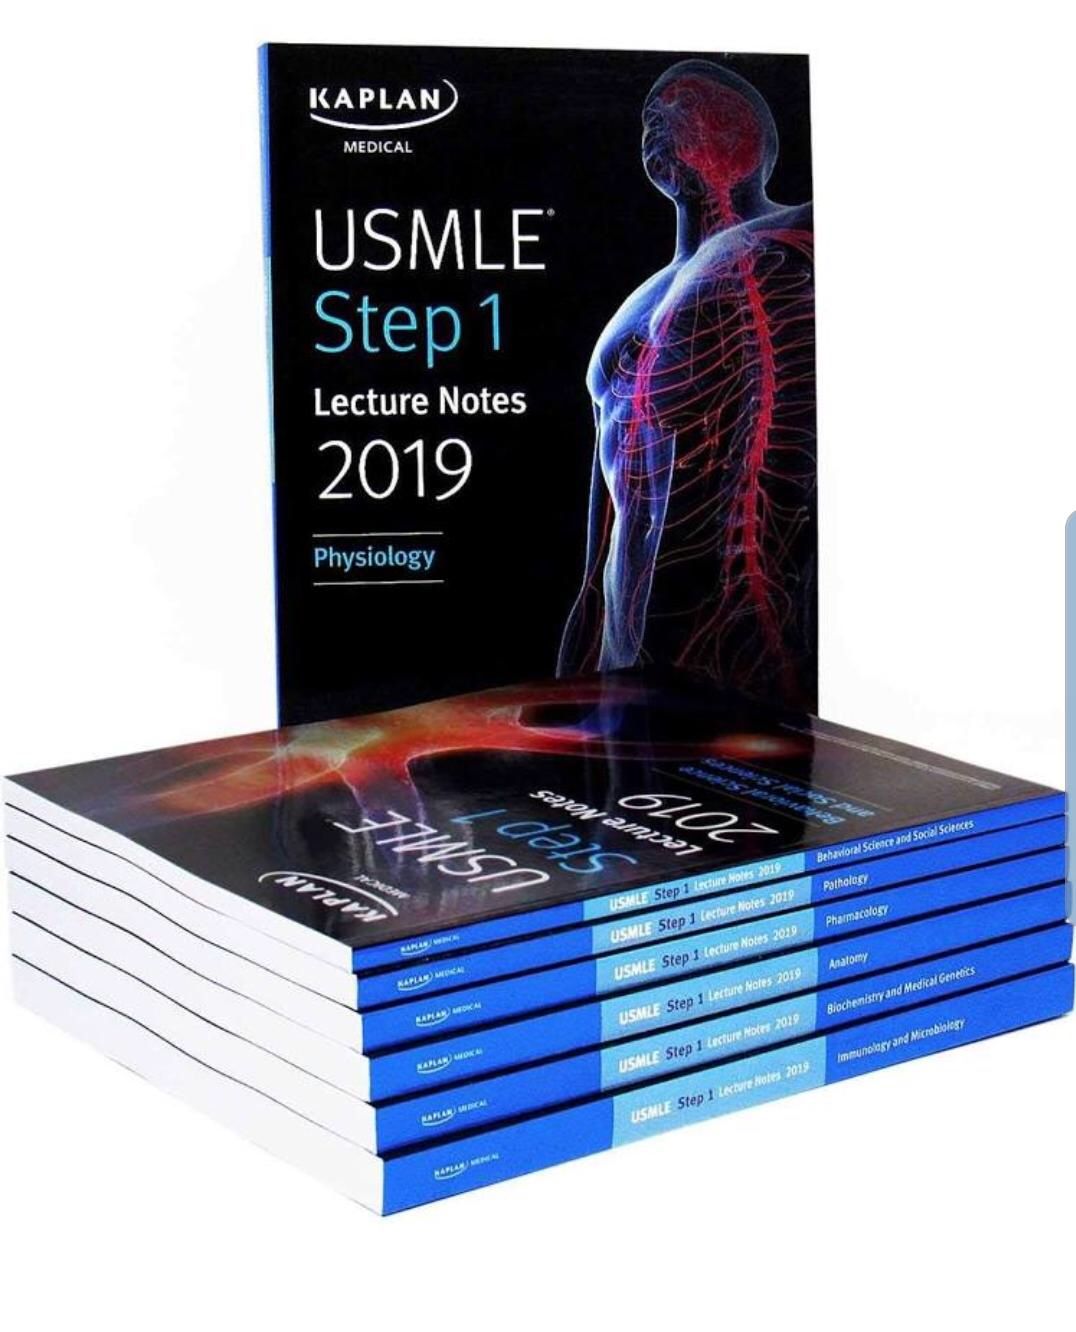 Kaplan's USMLE step 1 lecture notes 2019 brand new. $100